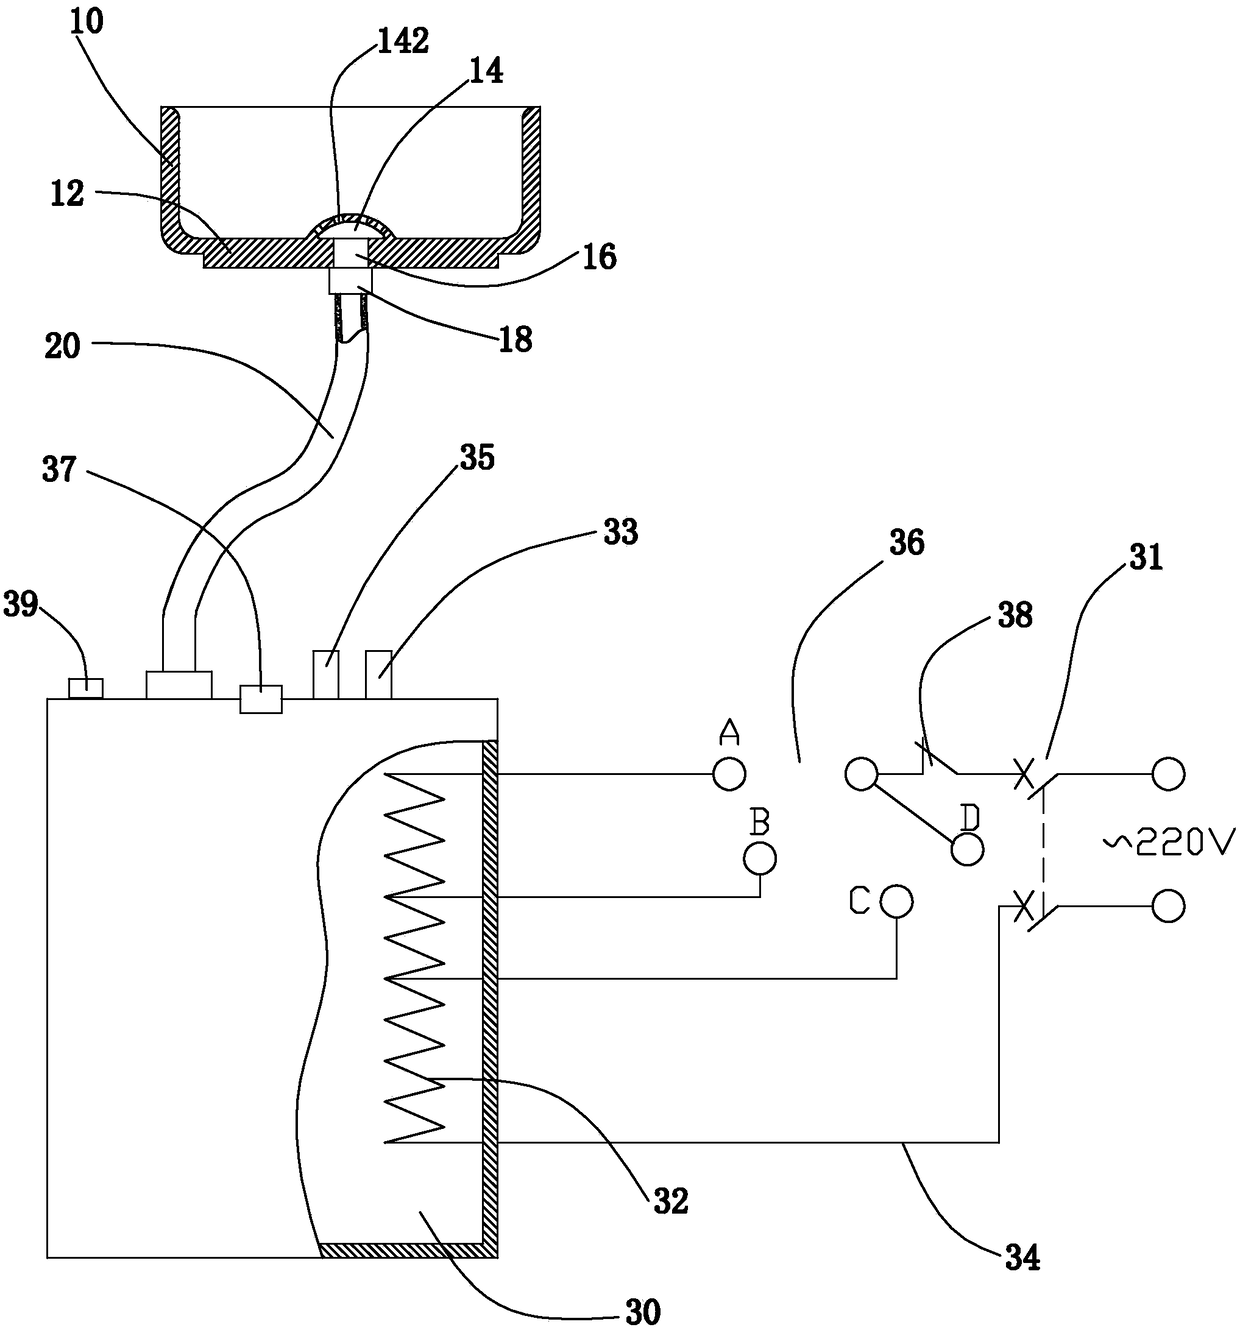 Anti-repeated heating device for water dispenser